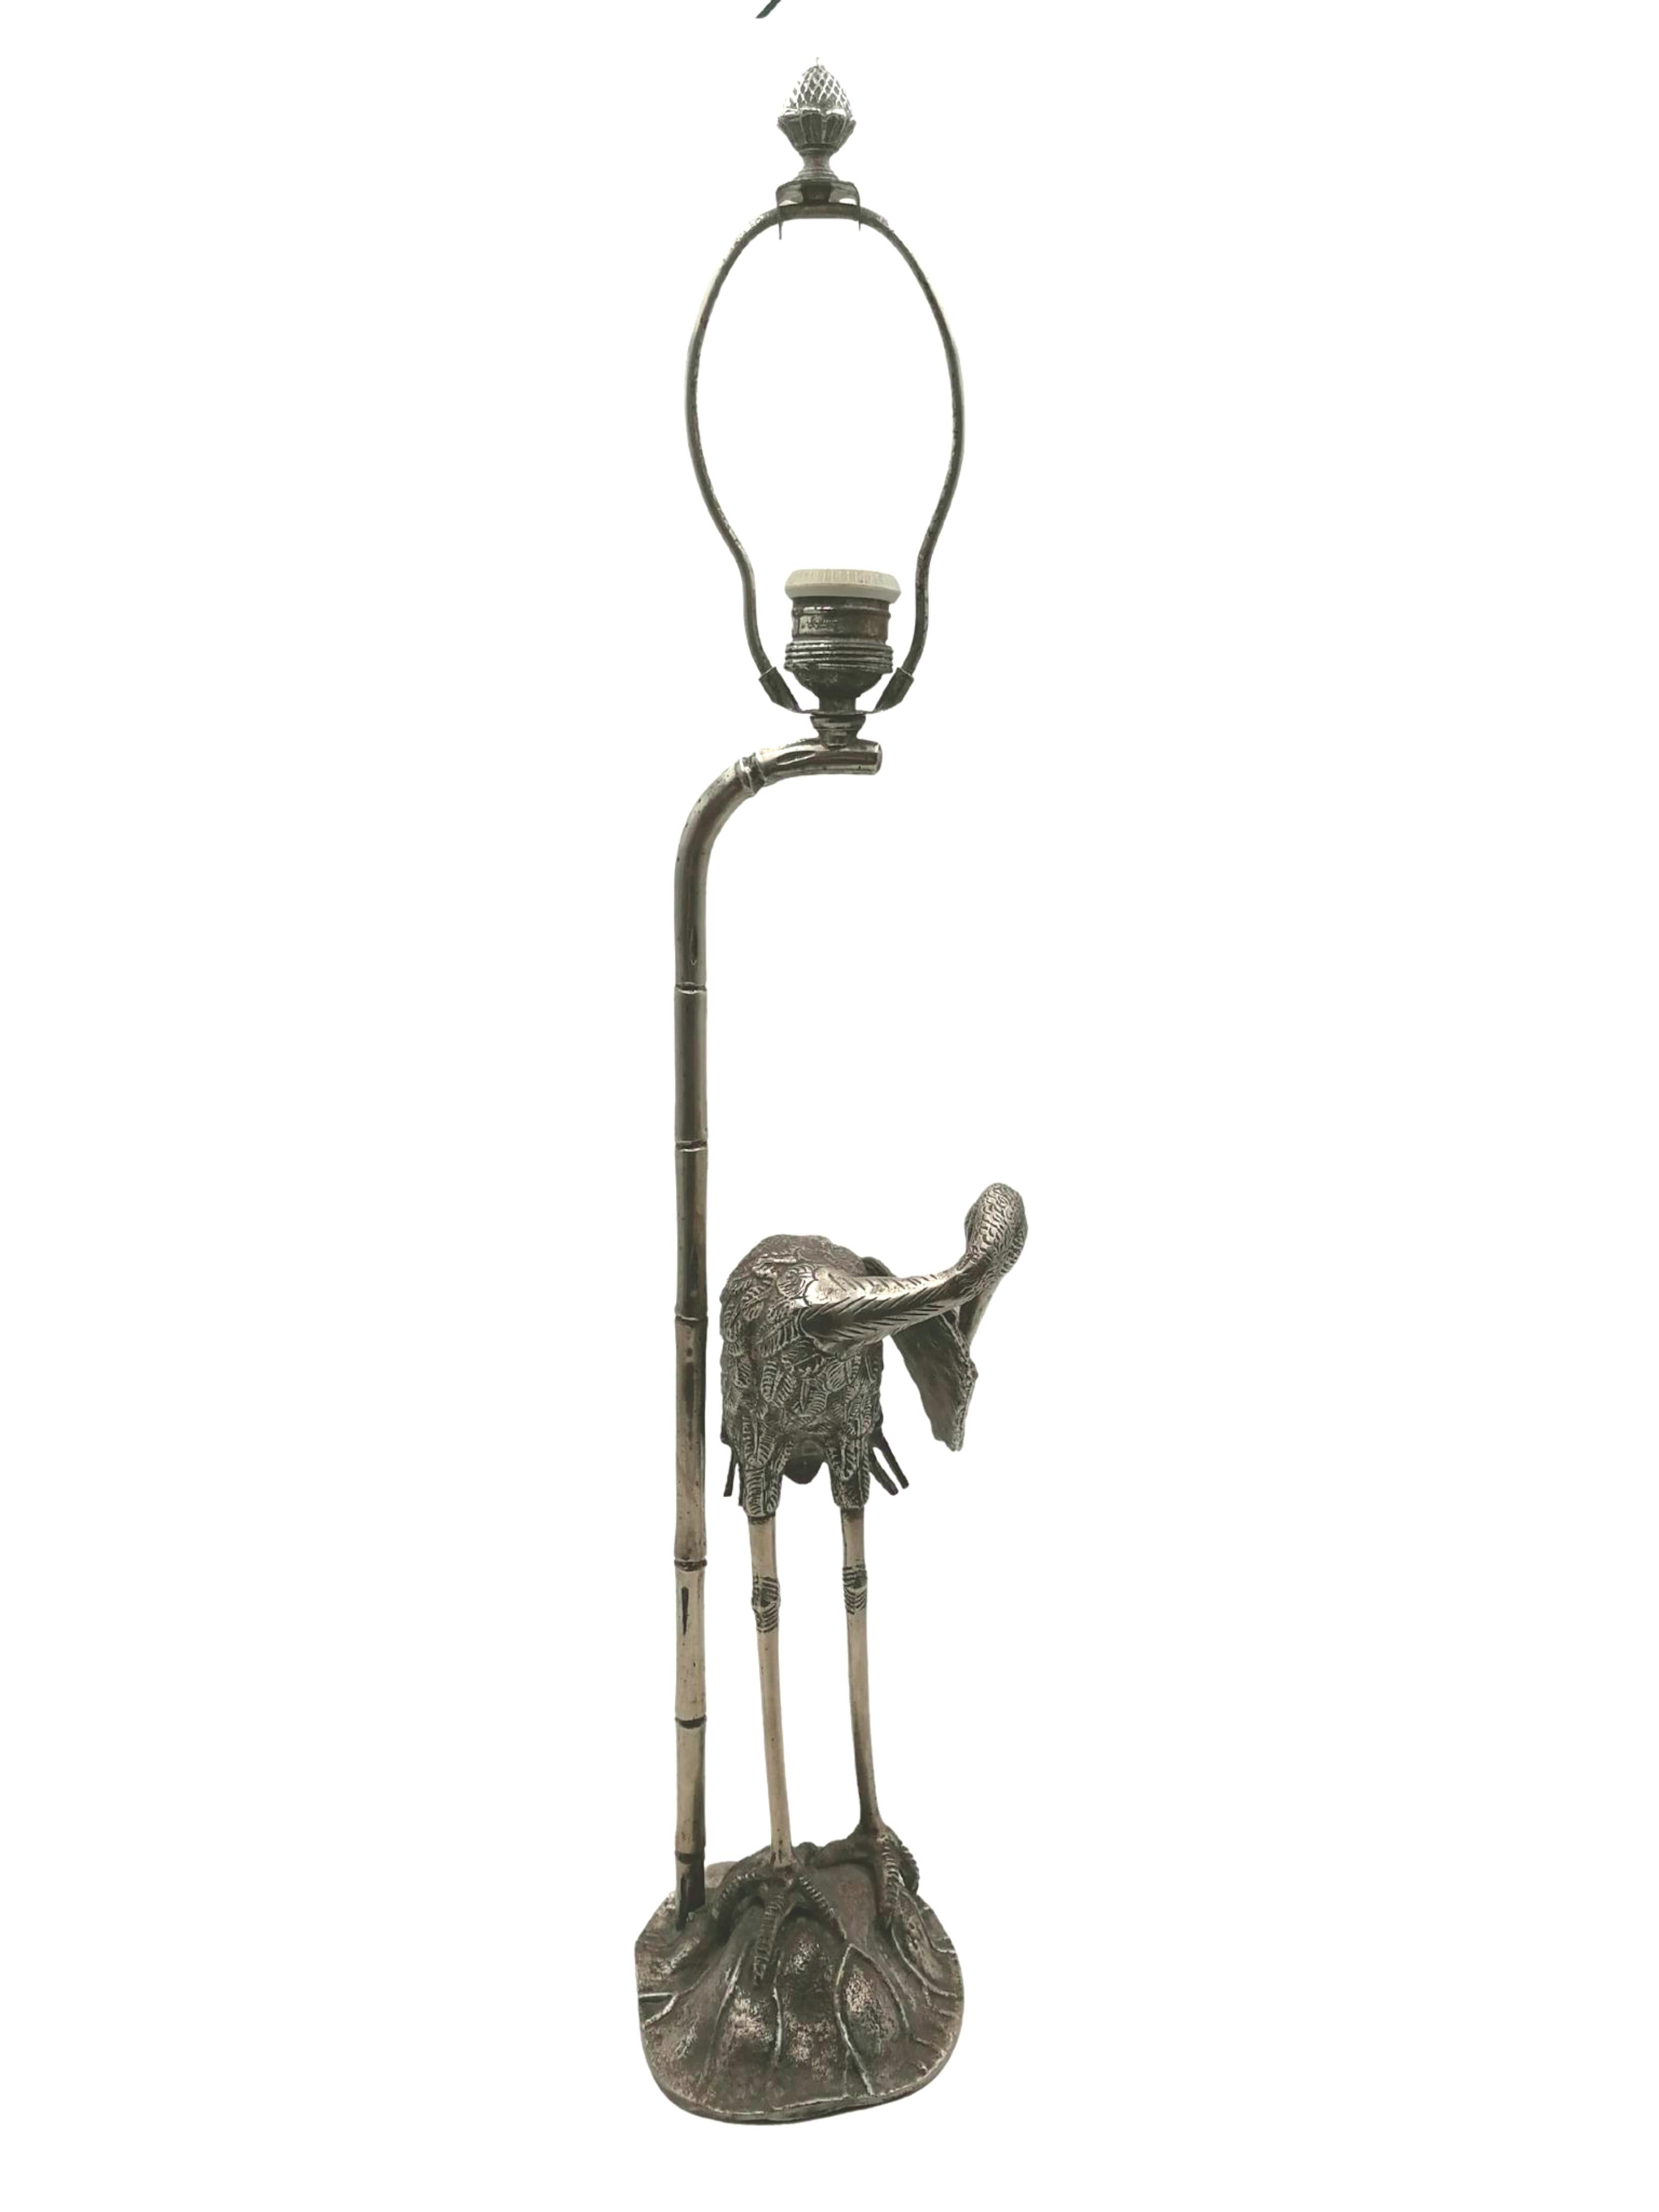 French Heron Lamp by Maison Baguès, Silver Plated Bronze, Art Deco, 1940 For Sale 2